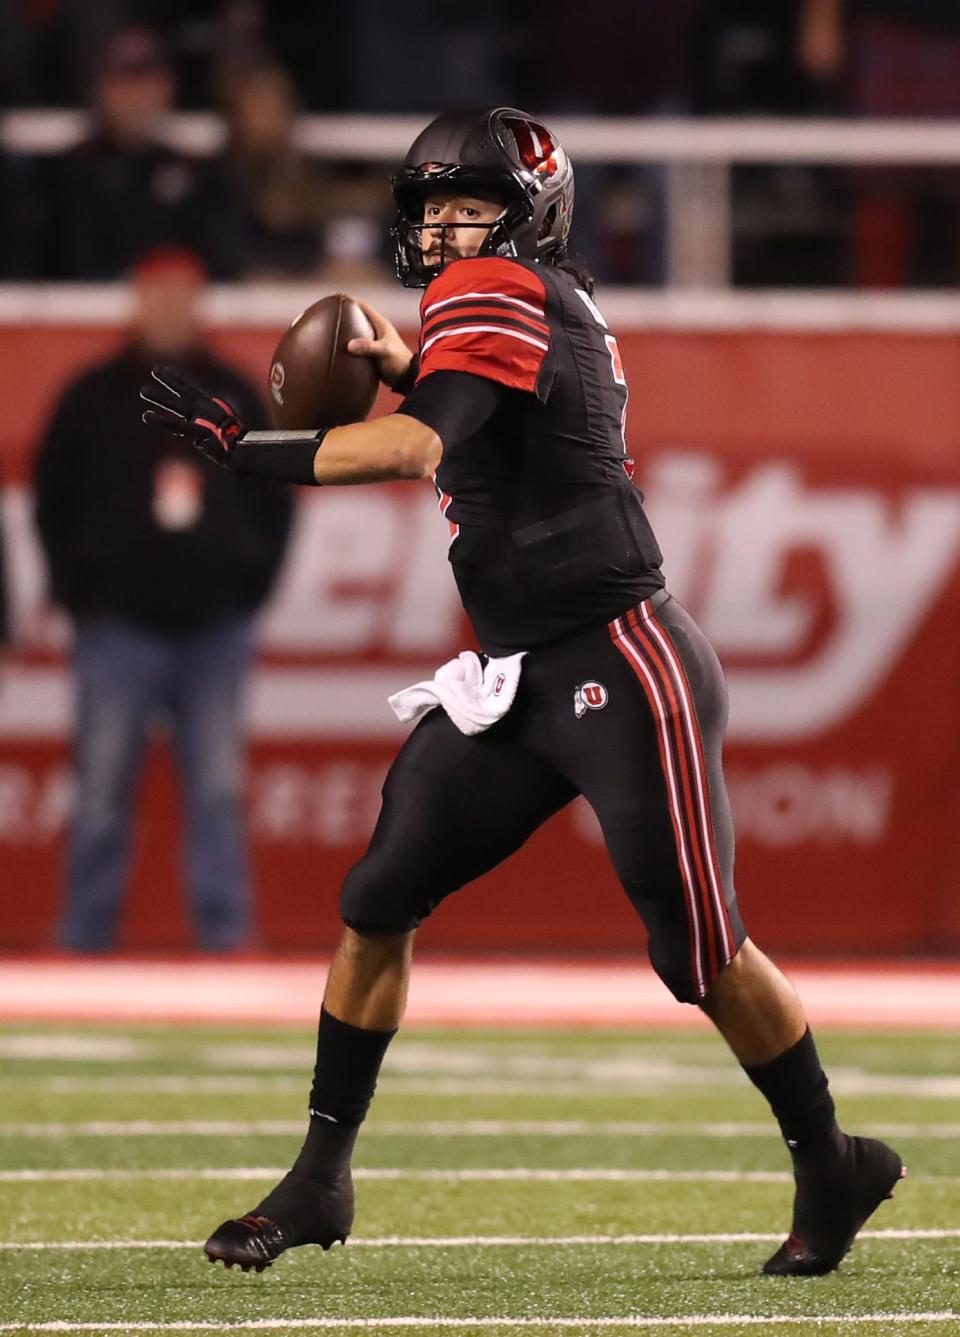 Utes quarterback Cameron Rising during a game against the UCLA Bruins.